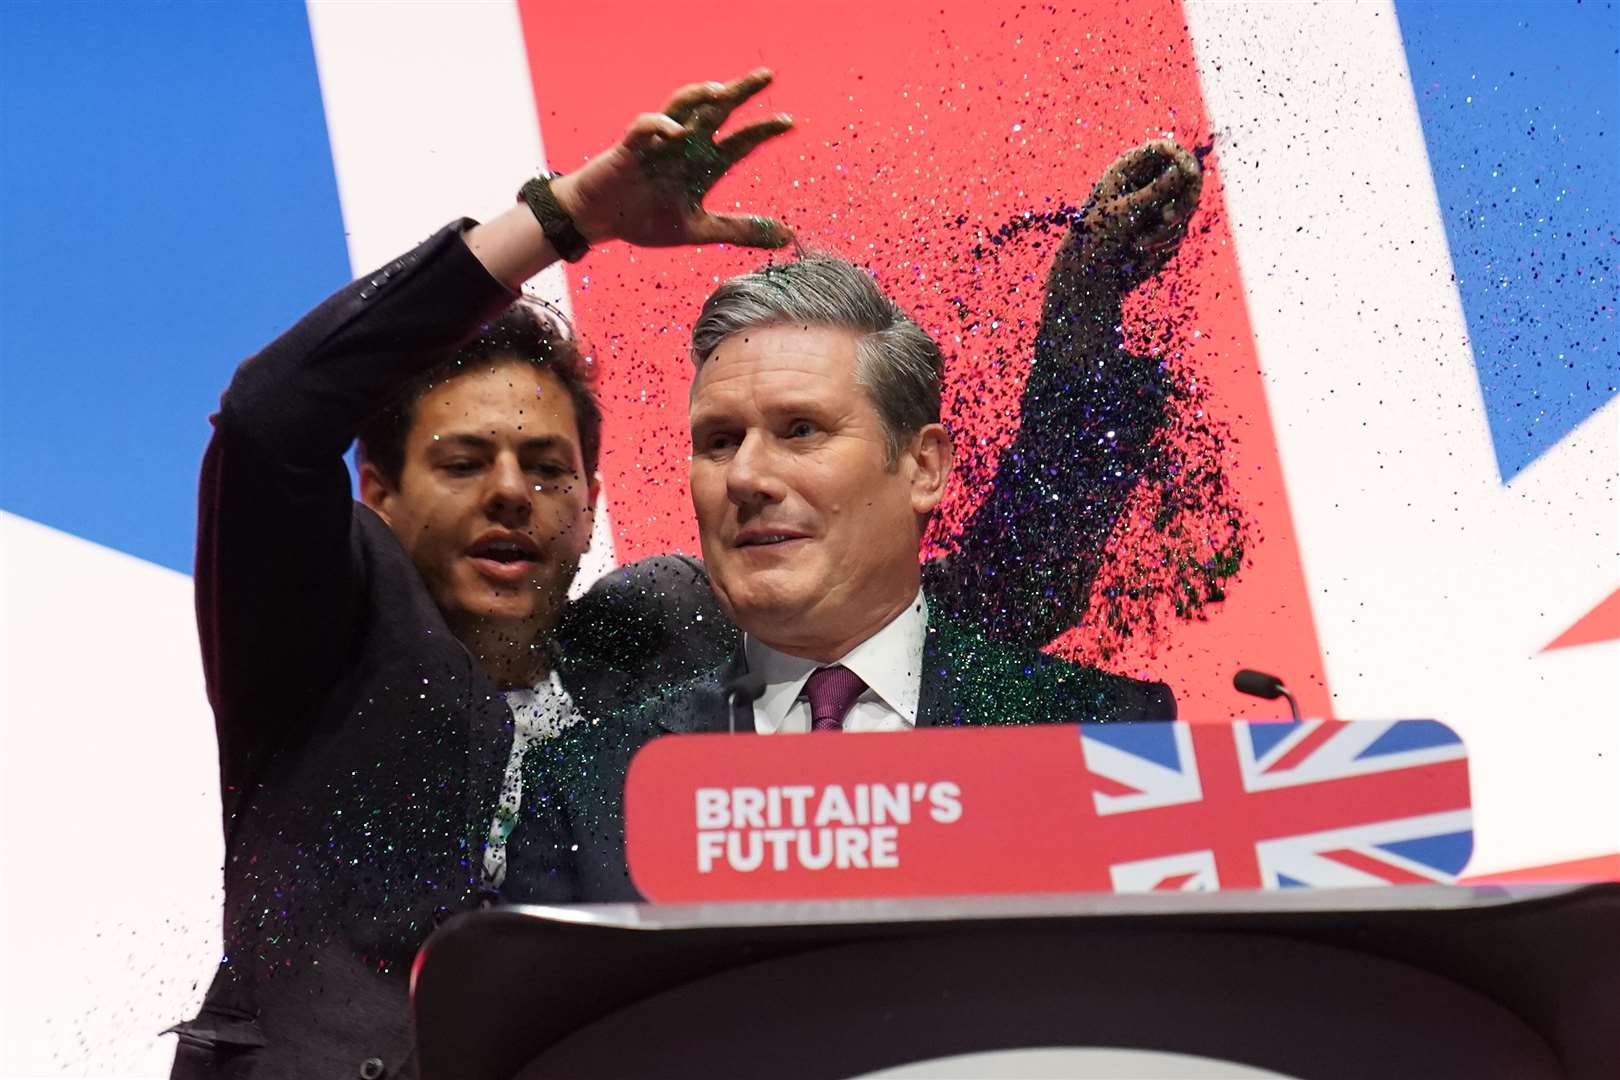 A protester disrupts Sir Keir Starmer’s speech and throws glitter on the Labour leader (Stefan Rousseau/PA)